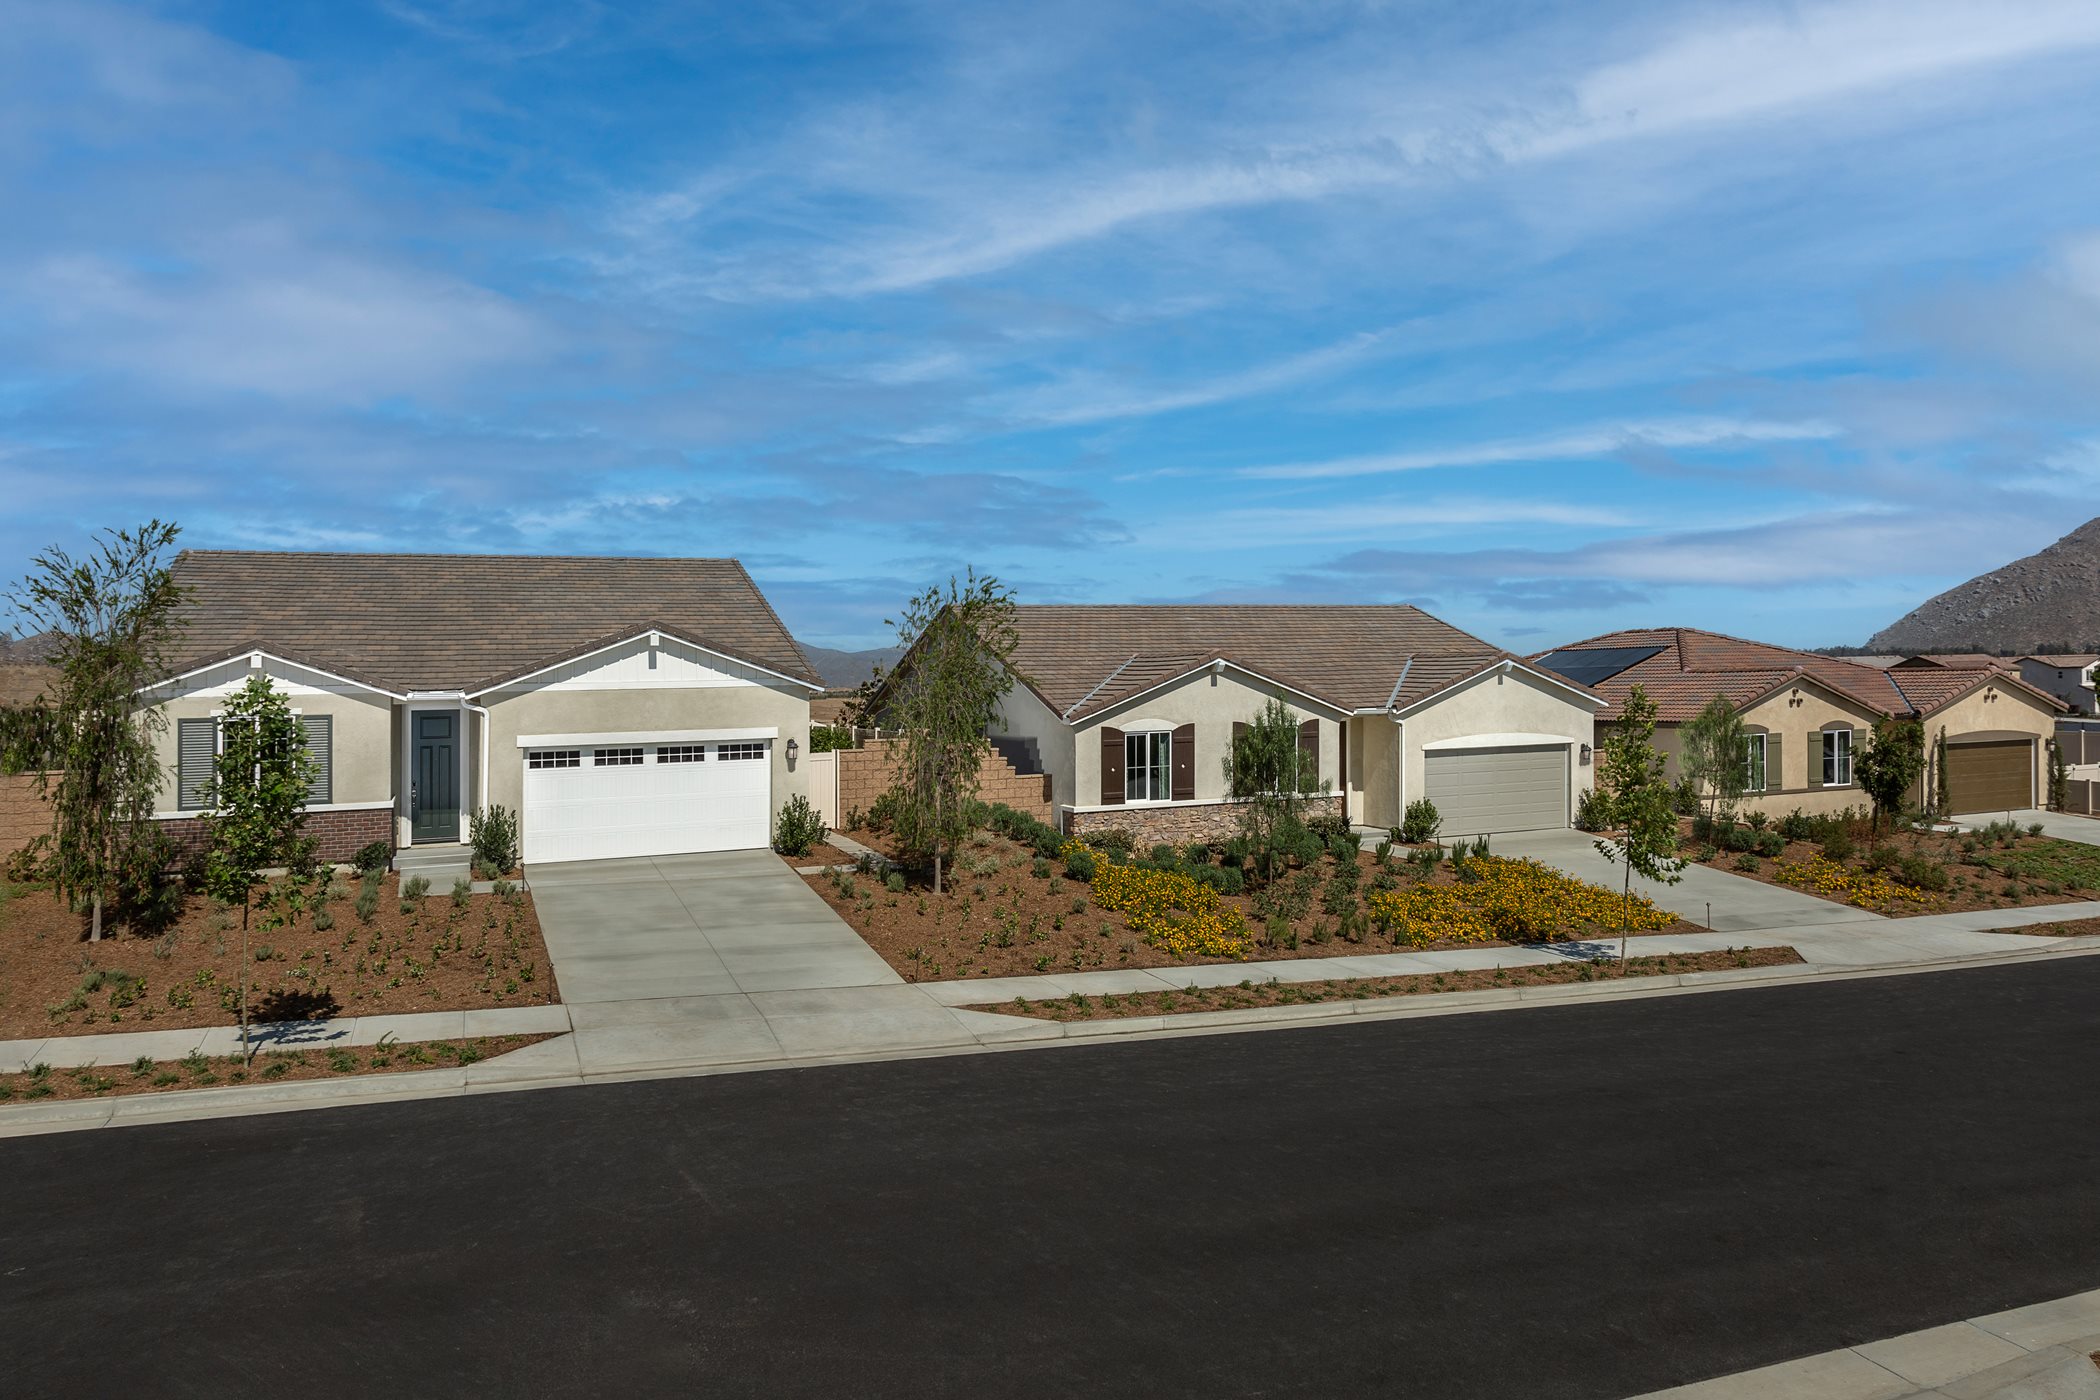 Street view of single-family homes in the community